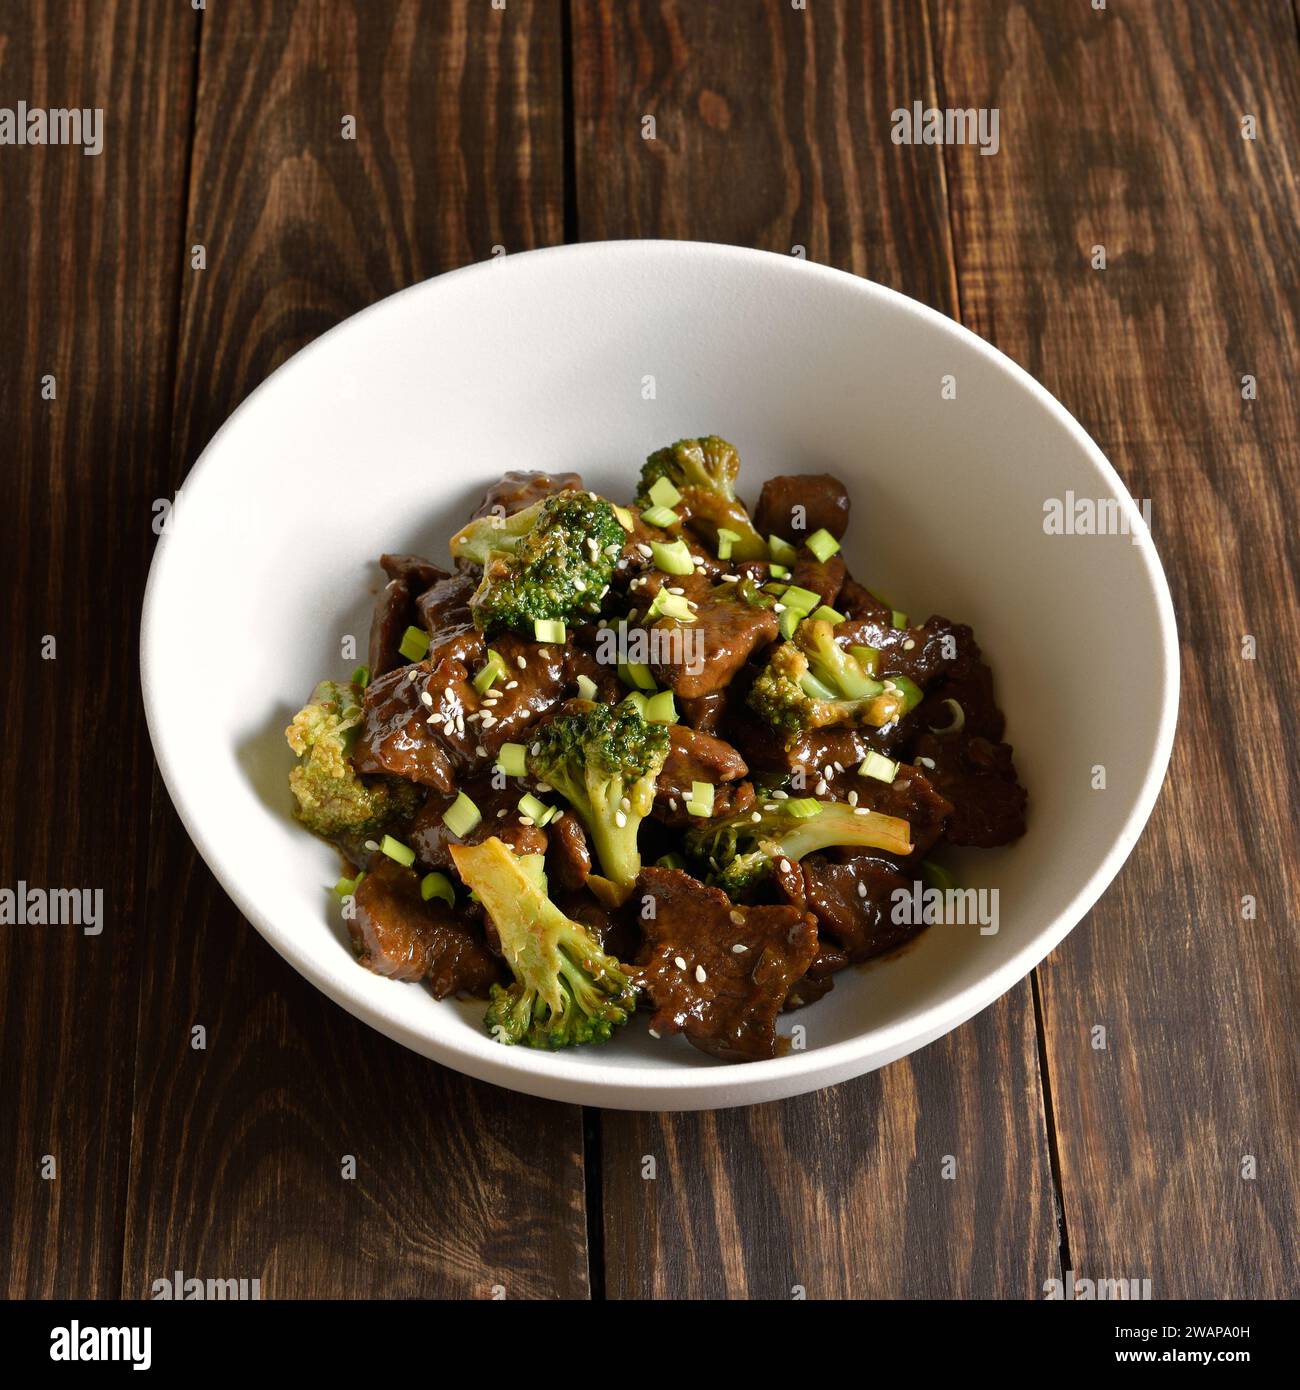 Stewed beef with broccoli in bowl over wooden background. Thinly sliced beef meat with roasted broccoli. Close up view Stock Photo